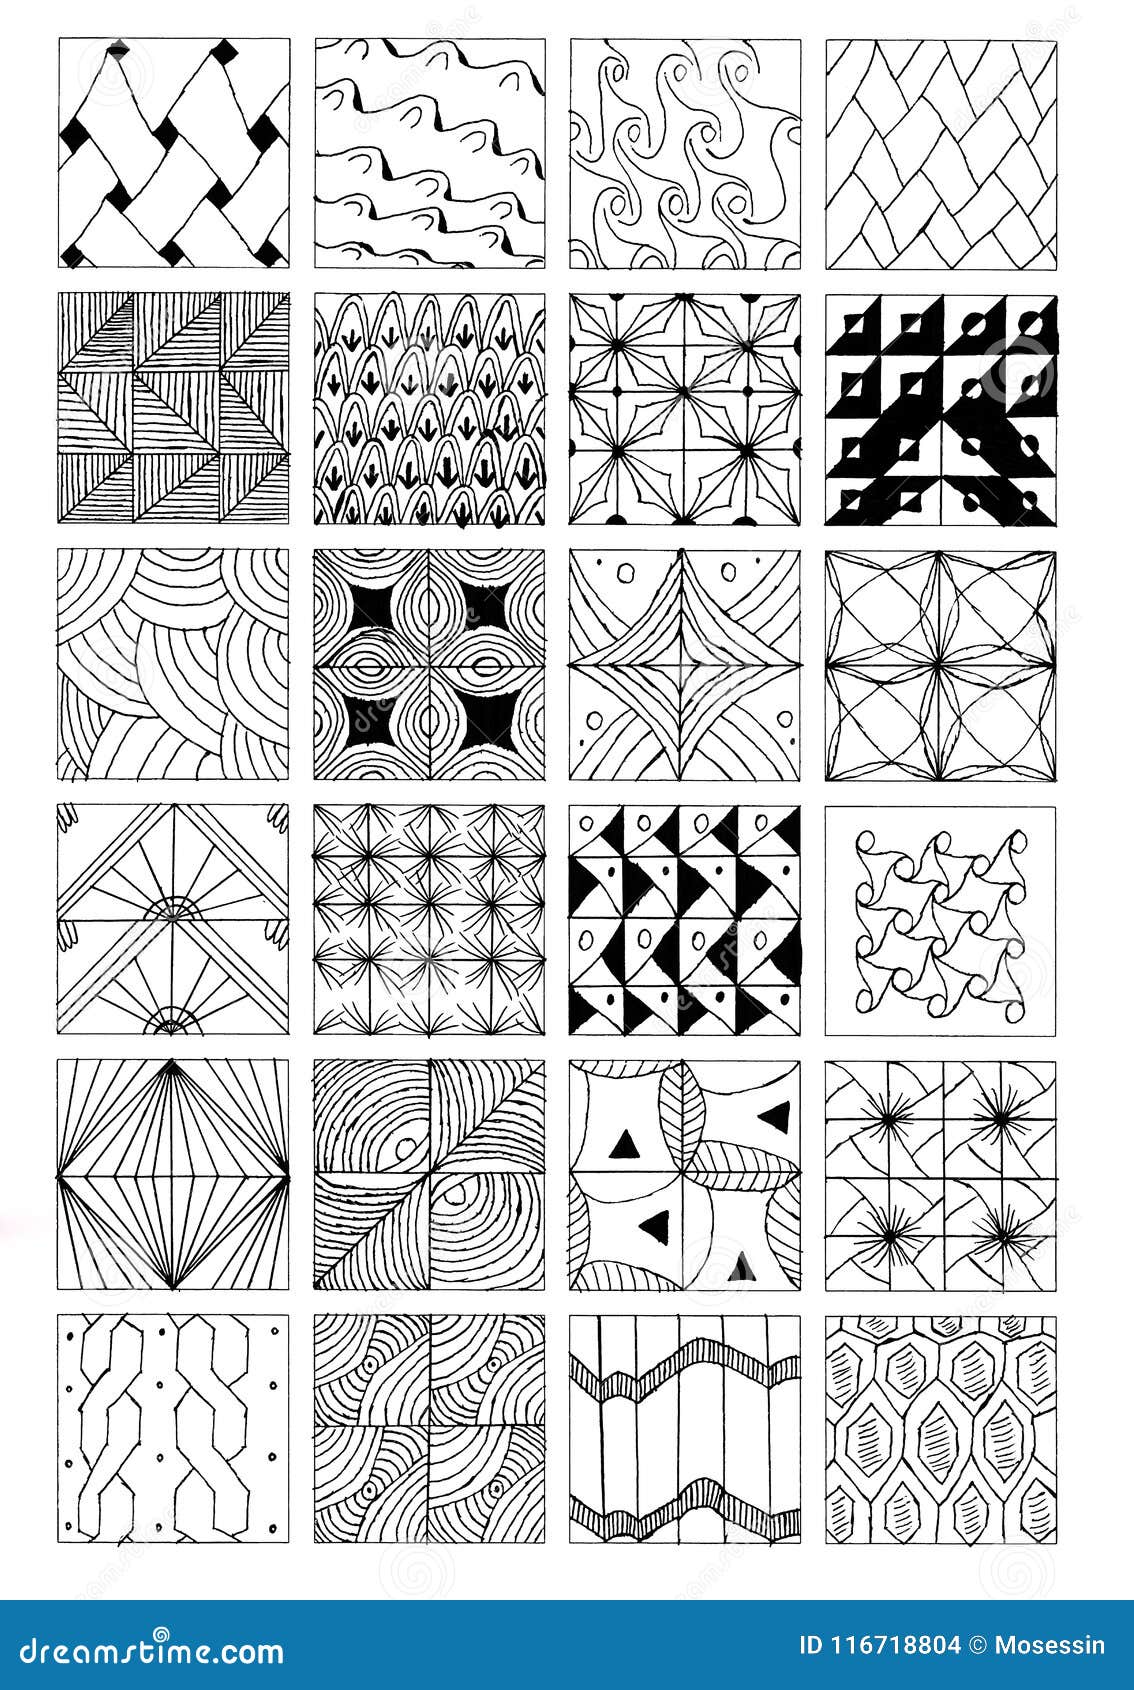 80 Easy, Simple & Cool Patterns to Draw for Beginners – The Beginning Artist